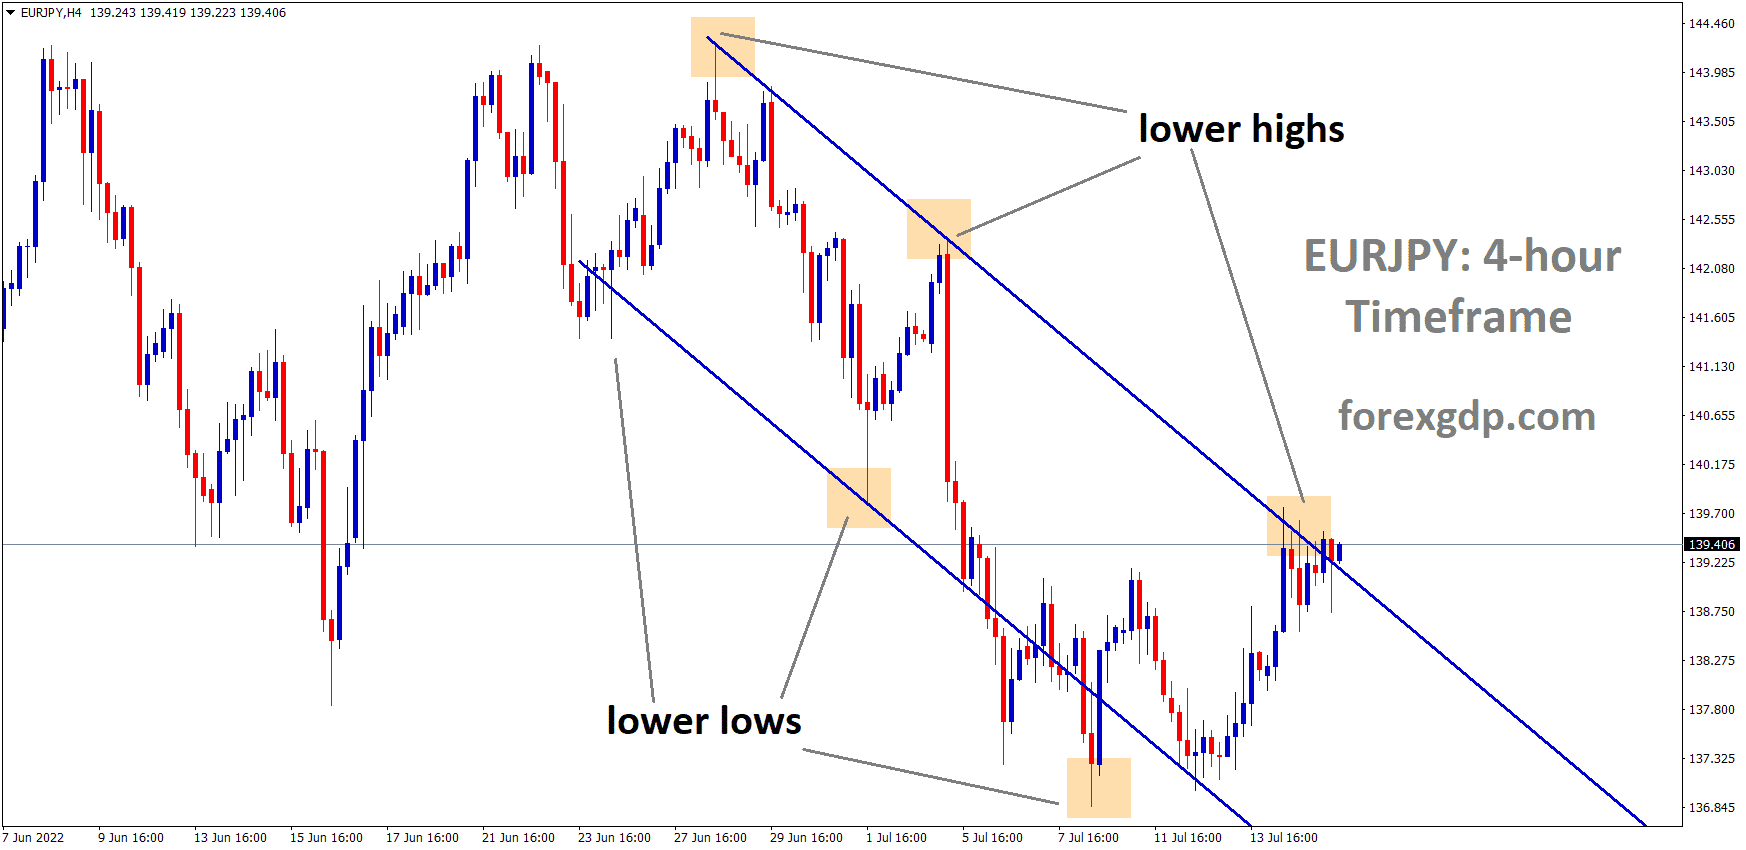 EURJPY is moving in the descending channel and the market has reached the Lower high area of the channel